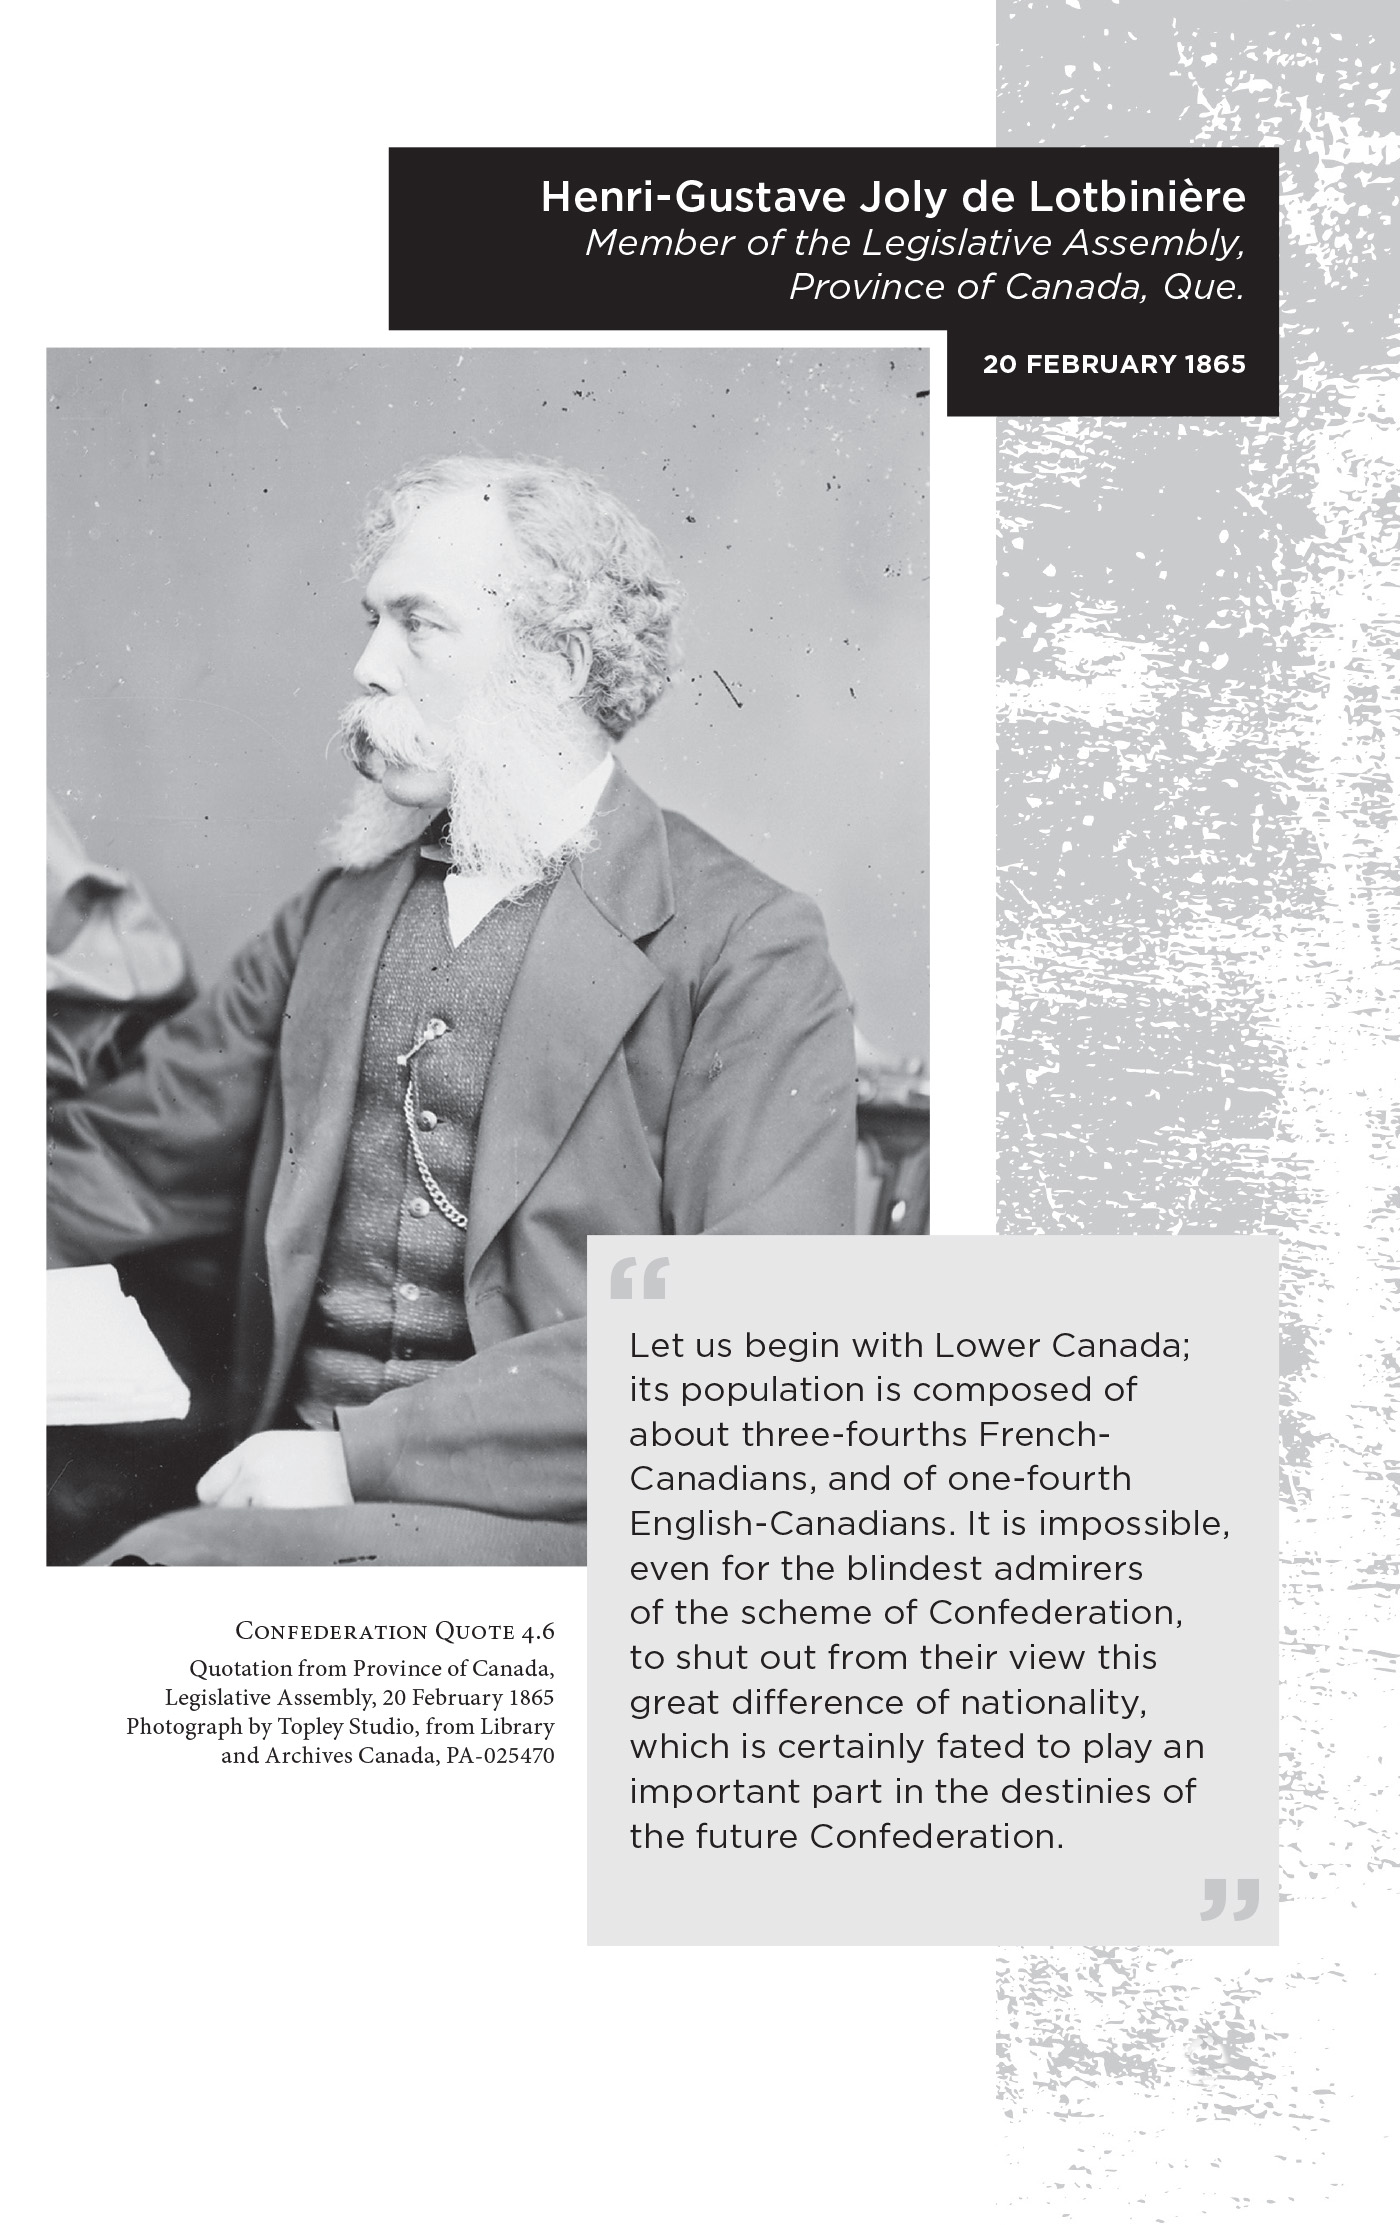 Henri-Gustave Joly de Lotbinière Member of the Legislative Assembly, Province of Canada, Que. 20 February 1865. “Let us begin with Lower Canada; its population is composed of about three-fourths French-Canadians, and of one-fourth English-Canadians. It is impossible, even for the blindest admirers of the scheme of Confederation, to shut out from their view this great difference of nationality, which is certainly fated to play an important part in the destinies of the future Confederation.” Confederation Quote 4.6 Quotation from Province of Canada, Legislative Assembly, 20 February 1865. Photograph by Topley Studio, from Library and Archives Canada, PA-025470